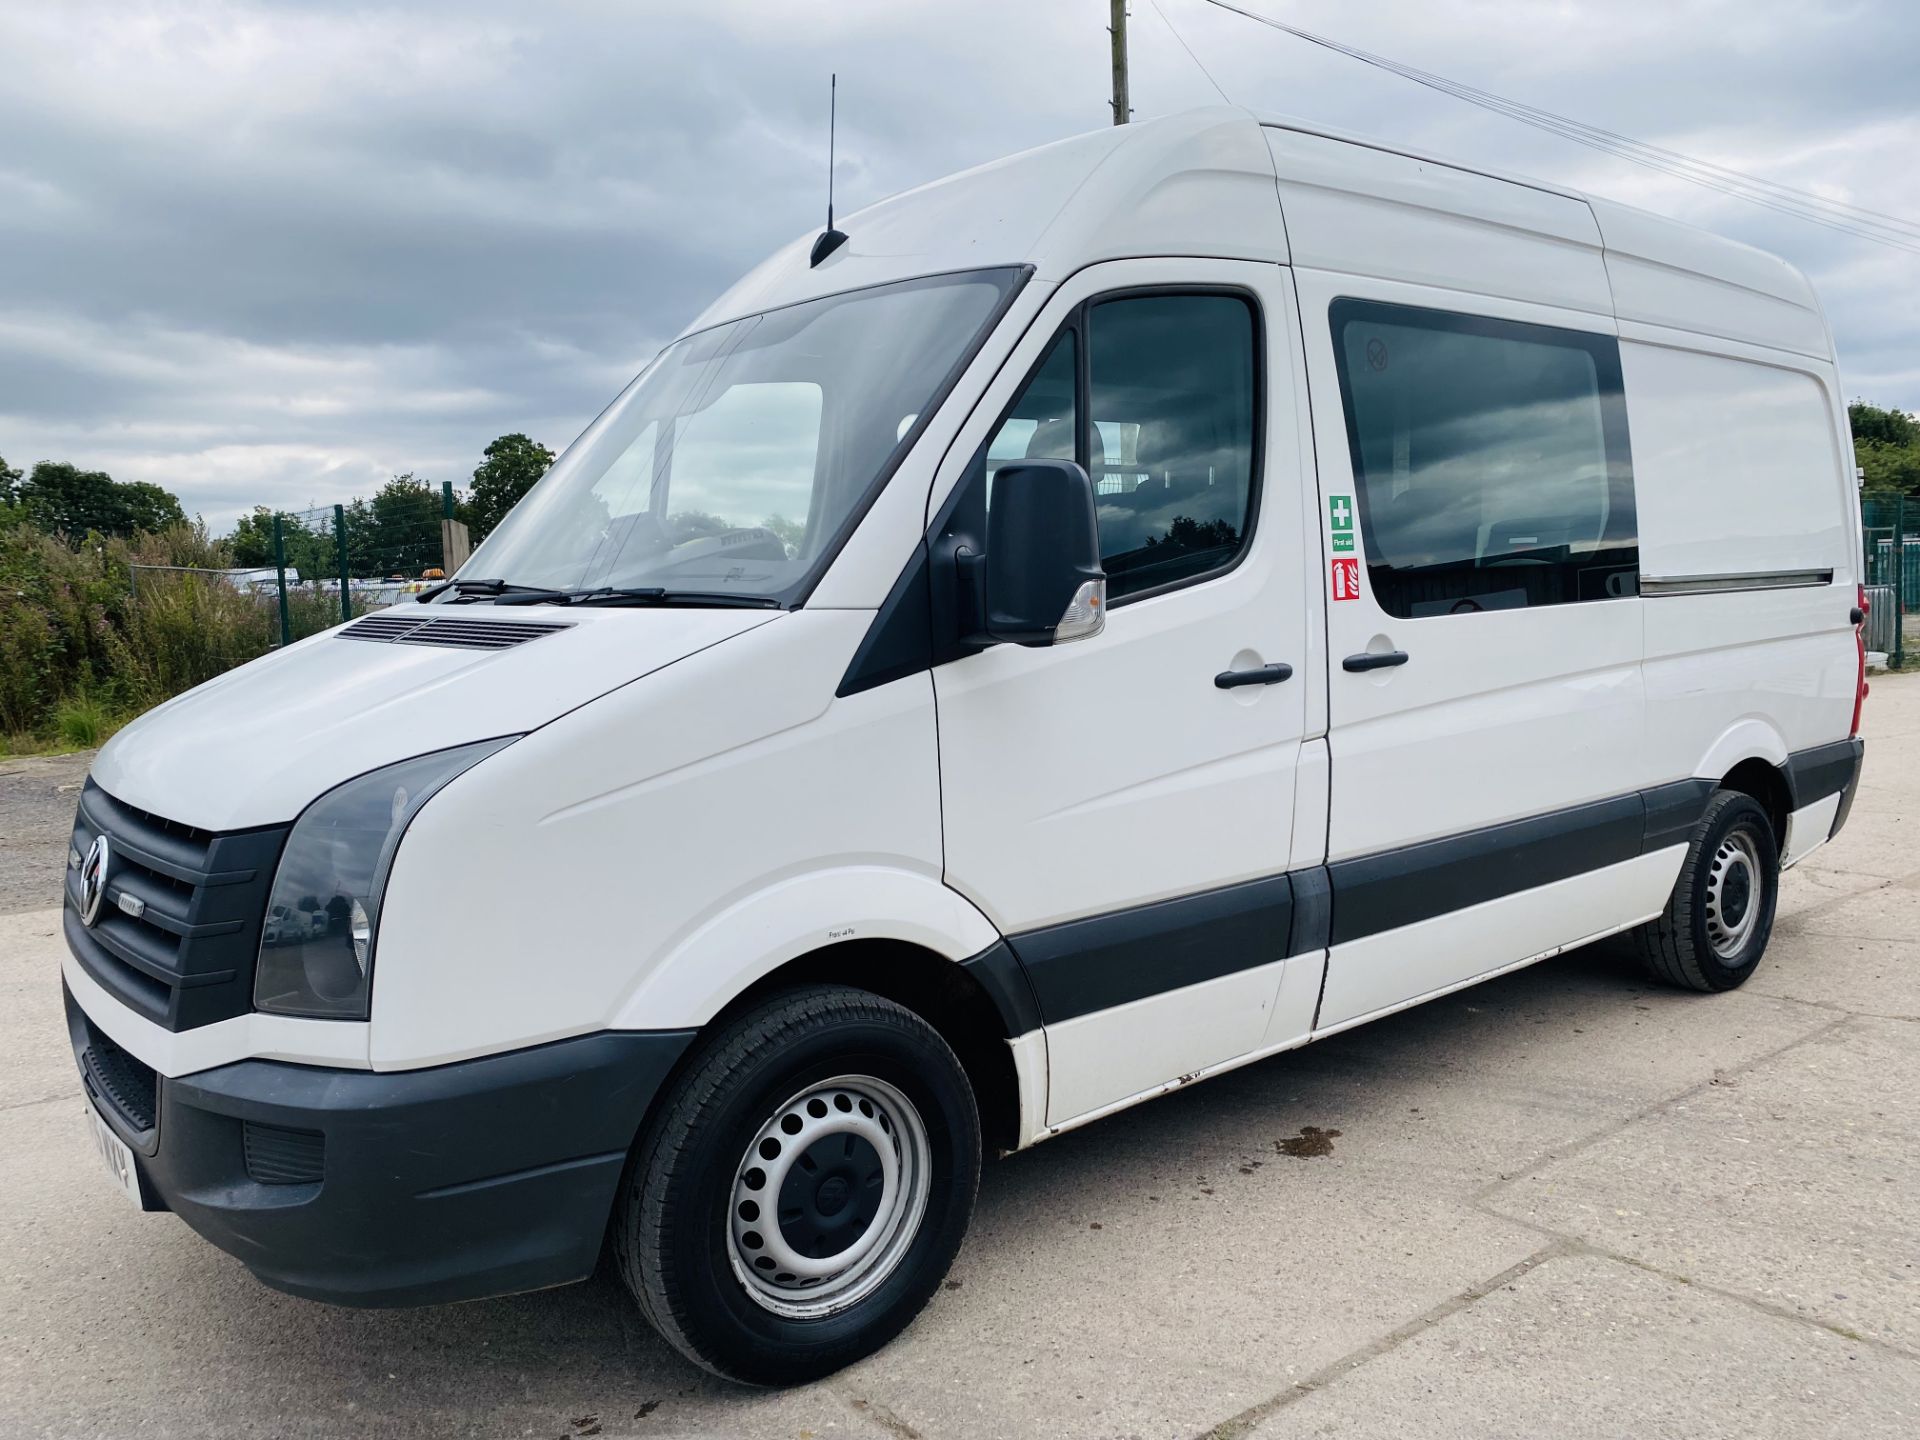 ON SALE VOLKSWAGEN CRAFTER 2.0TDI (136) MWB "MESSING UNIT WITH TOILET" 15 REG - 1 KEEPER - FULL SPEC - Image 2 of 30